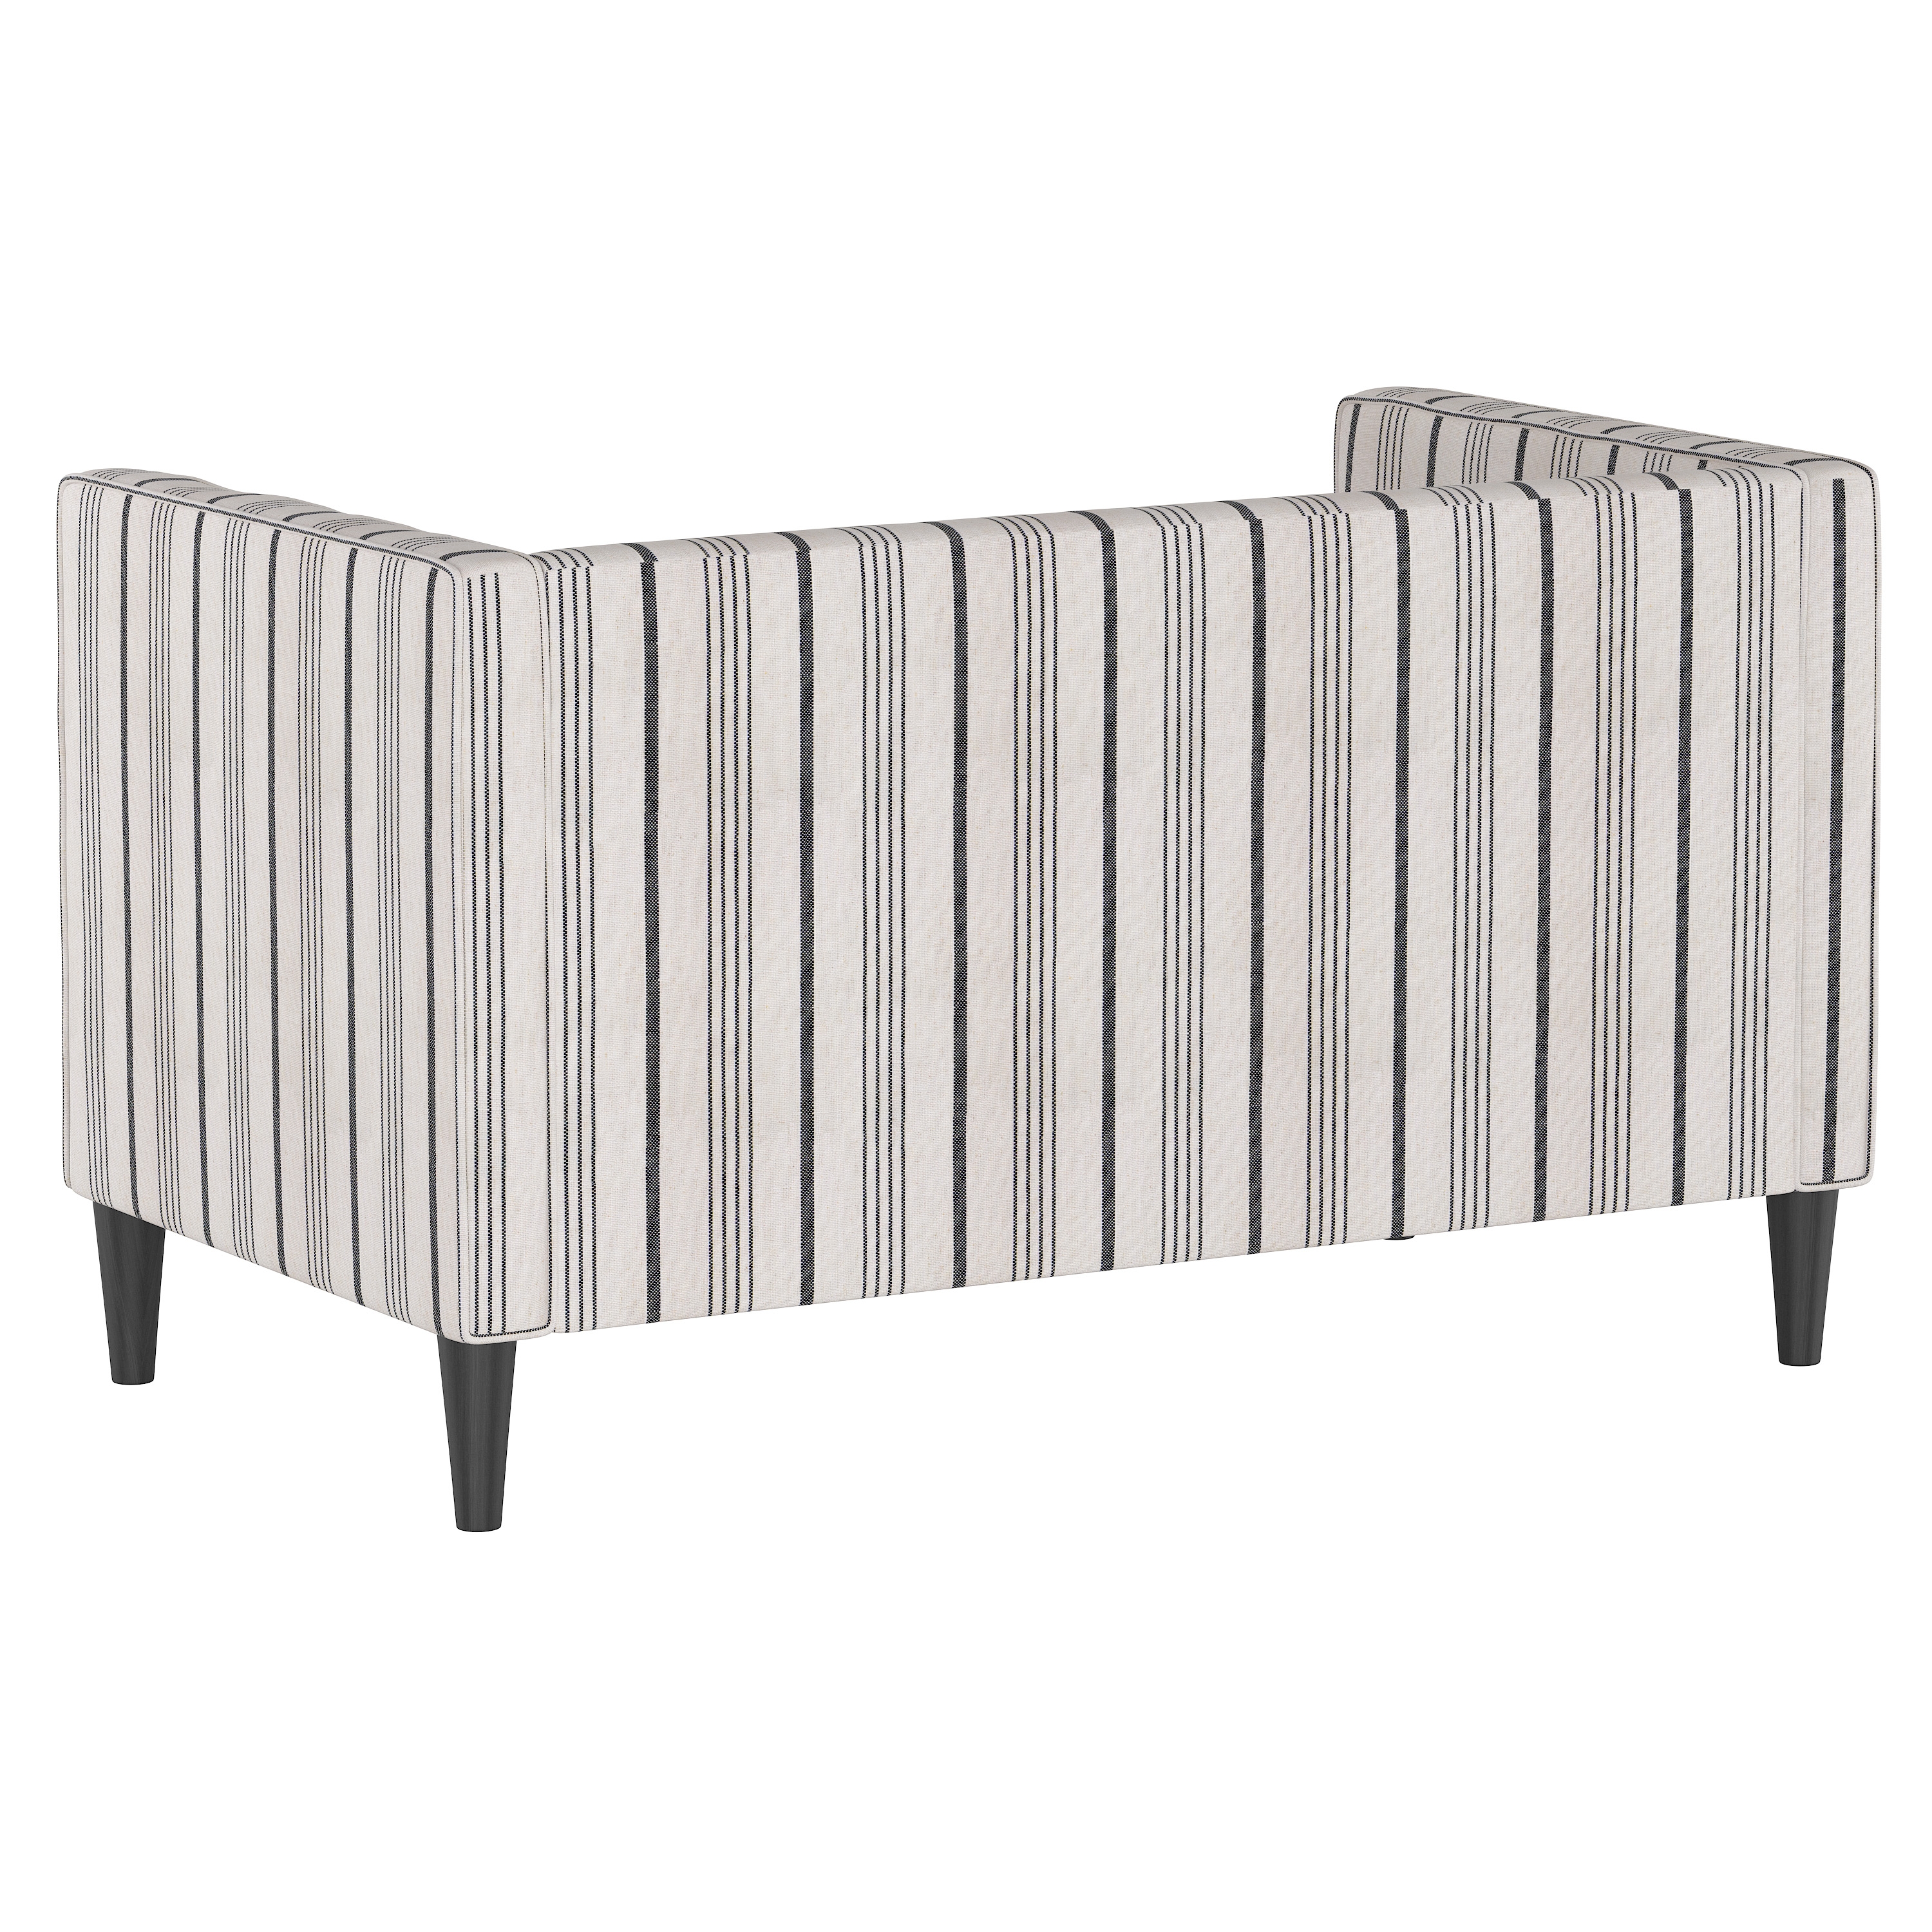 Downing Settee, Albion Stripe - DNU - Image 3